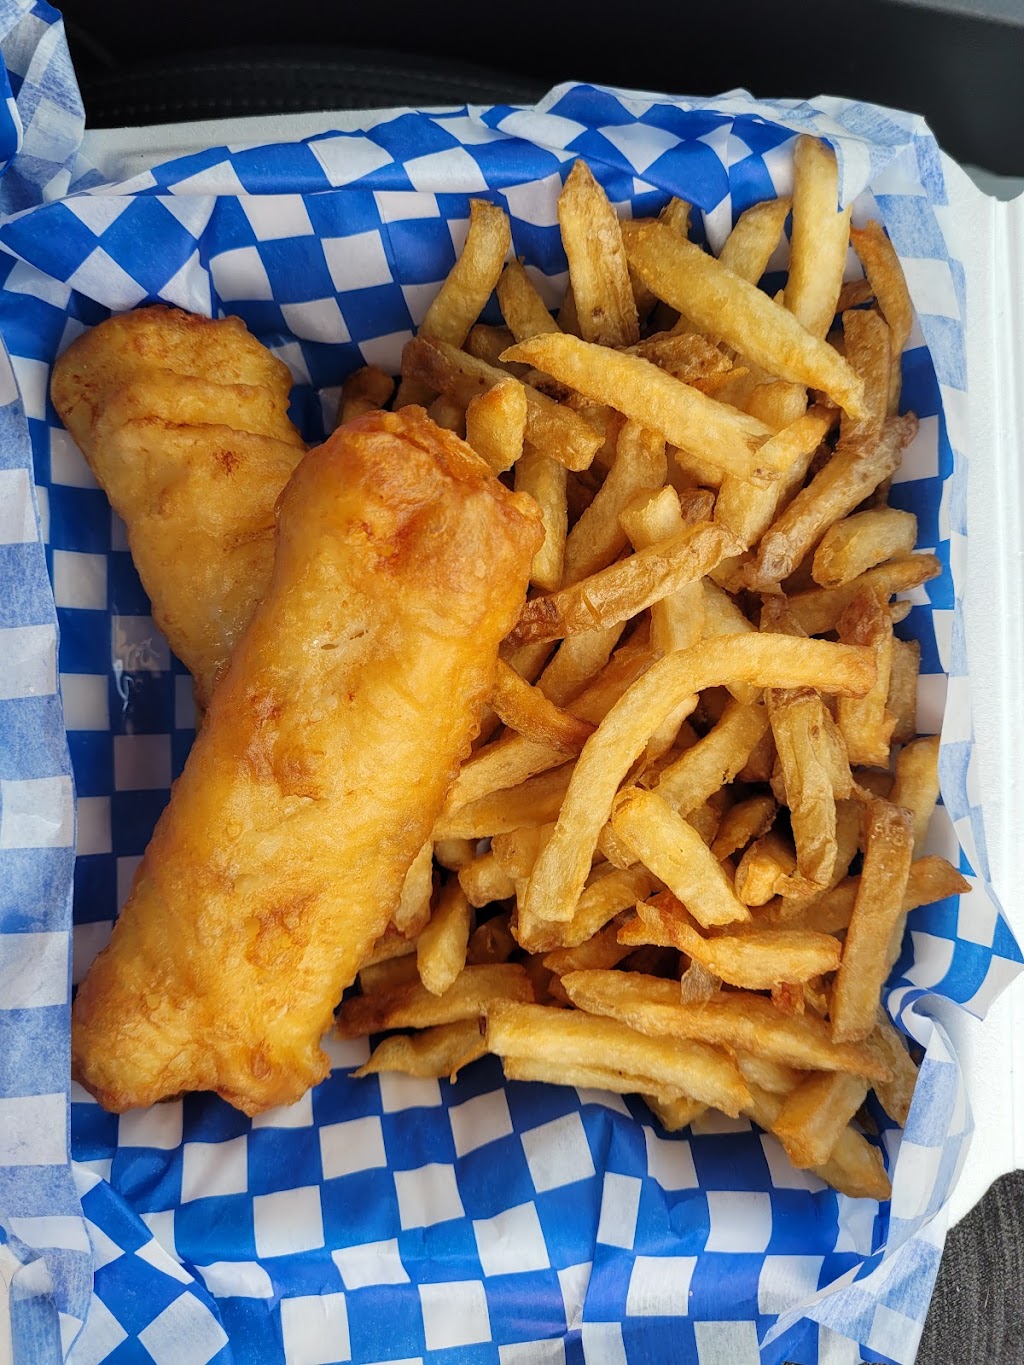 Cottage country fish & chips | 141 Hastings St N, Bancroft, ON K0L 1C0, Canada | Phone: (343) 476-5685